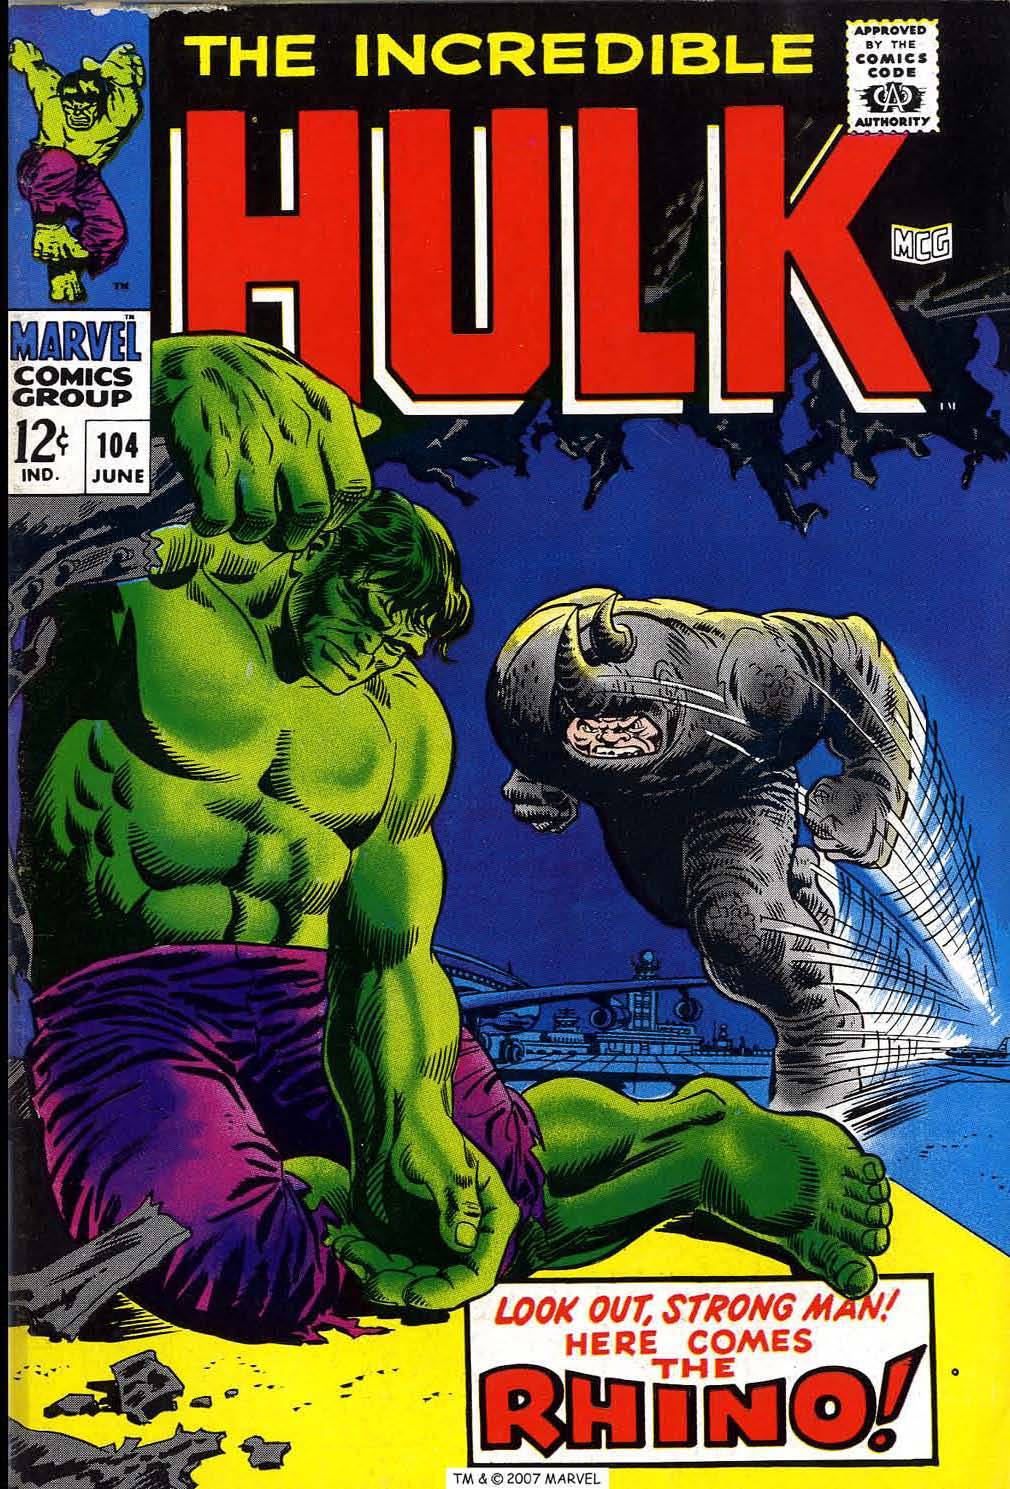 comicbookcovers:
“The Incredible Hulk #104, June 1968, cover by Marie Severin and Frank Giacoia
”